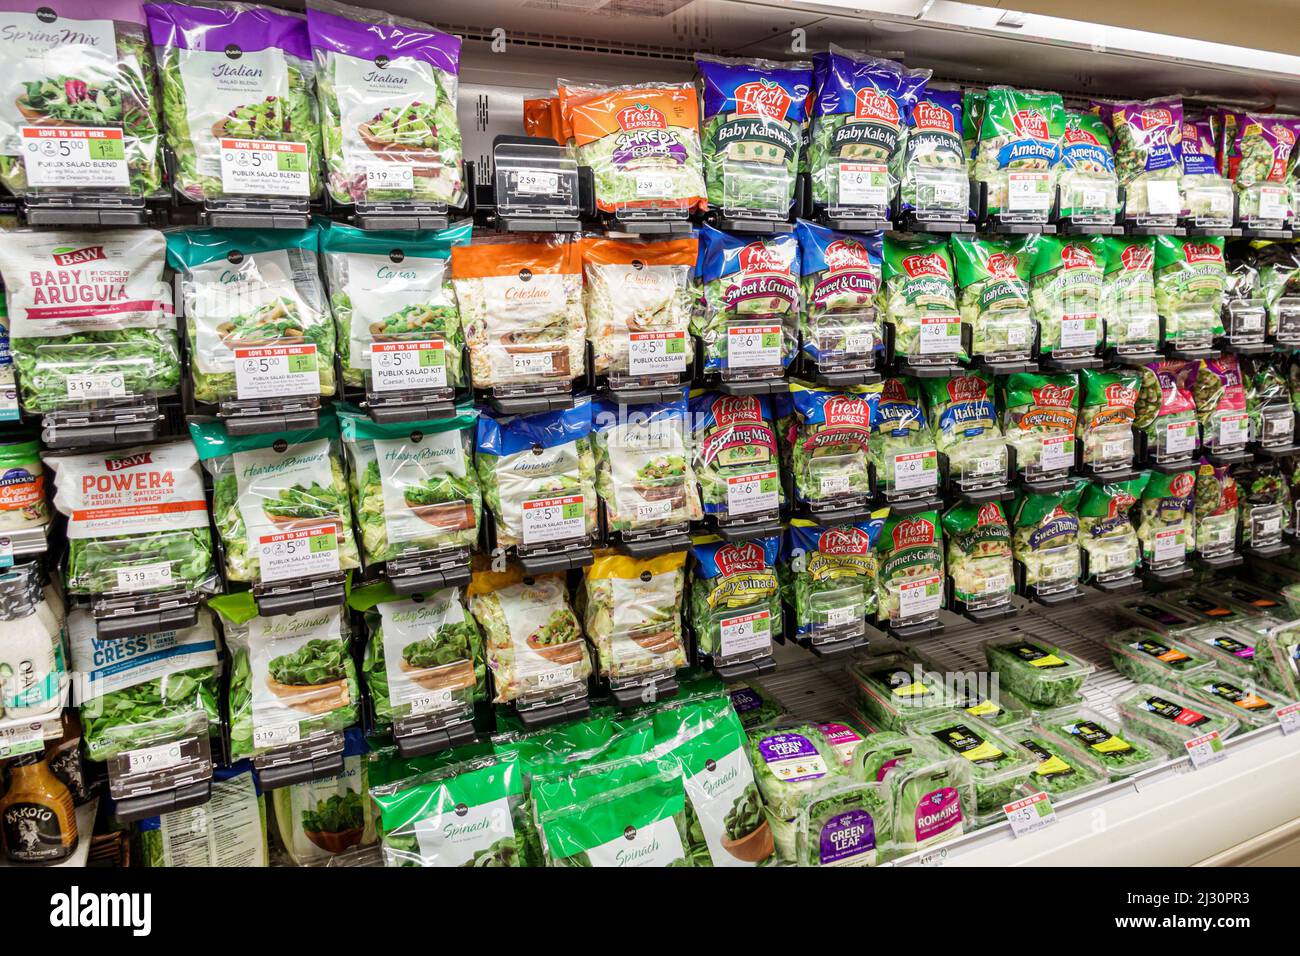 Miami Beach Florida,Publix,grocery store supermarket,food,inside interior,display sale,bags bagged salad Fresh Express Stock Photo